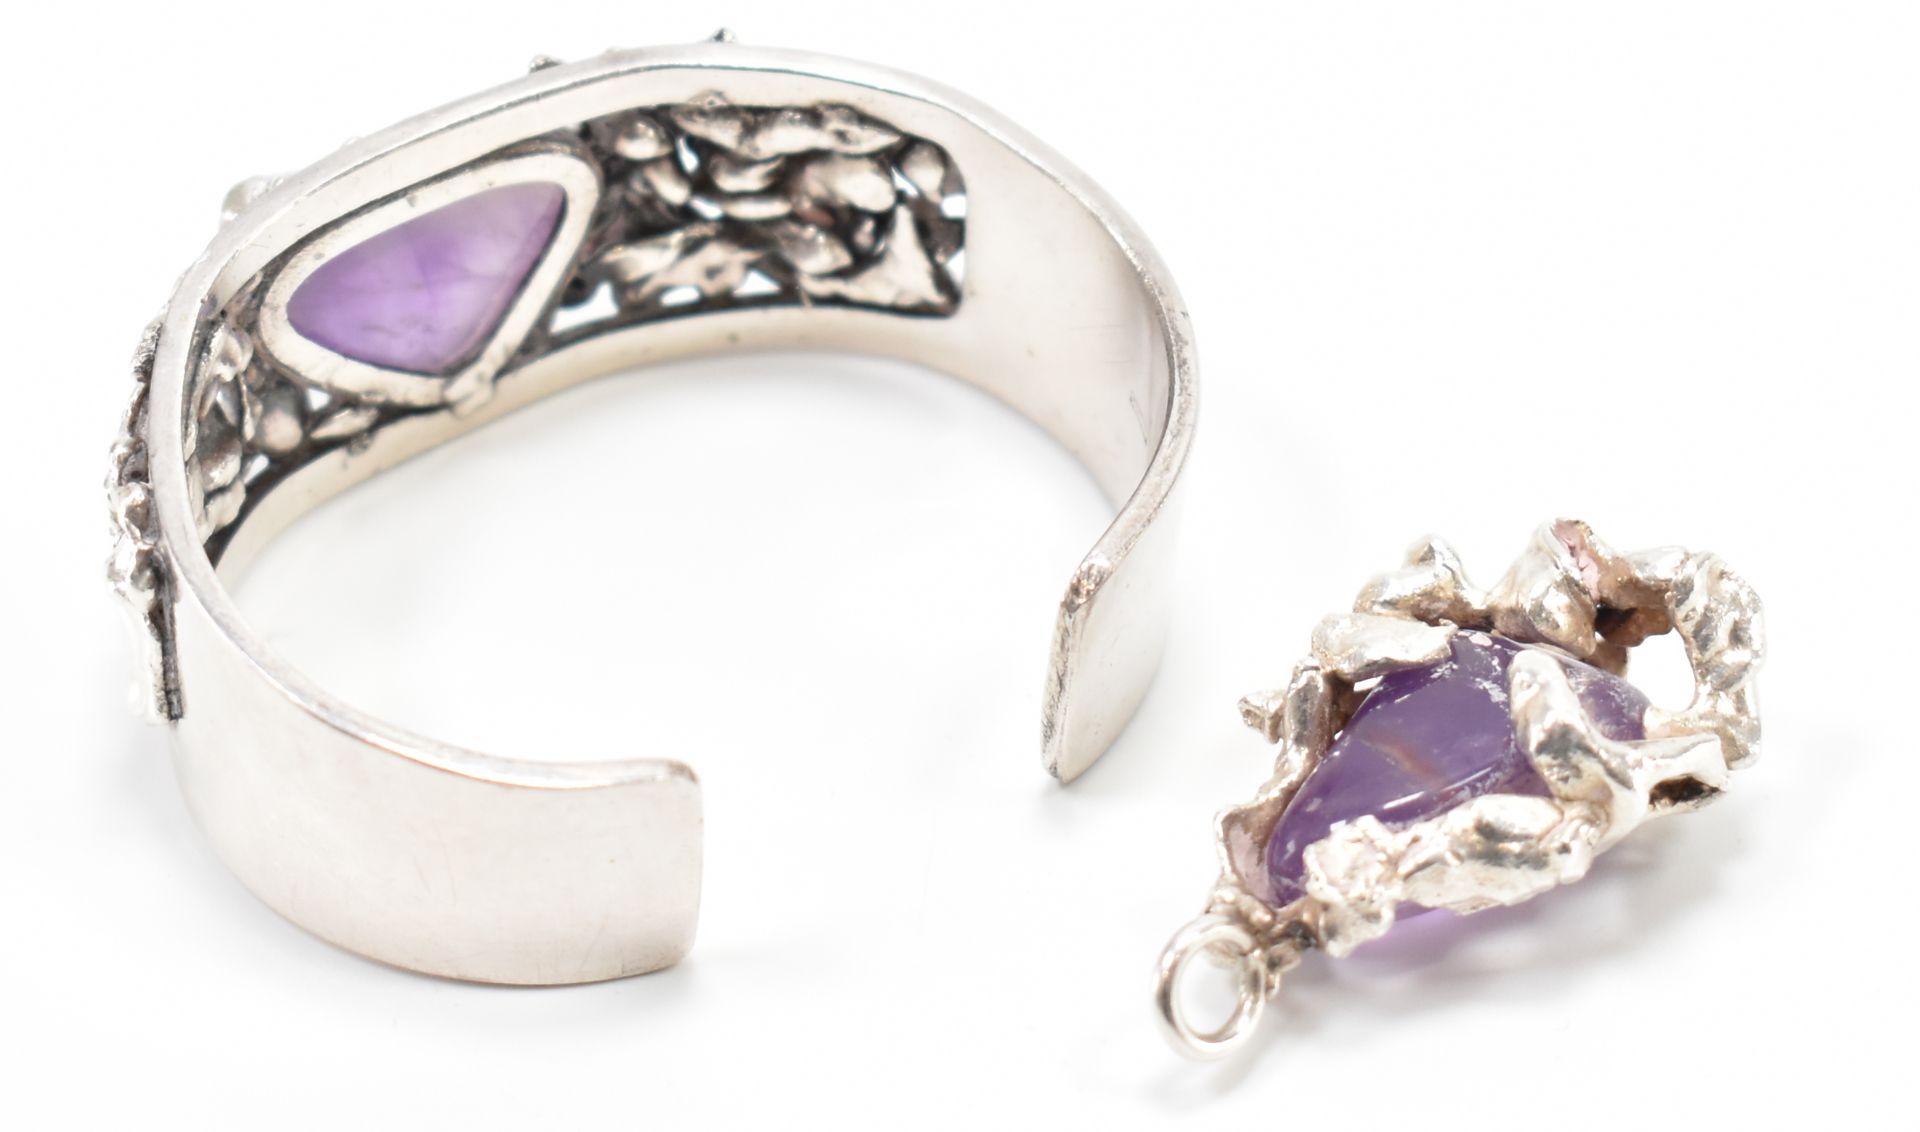 SILVER & AMETHYST PENDANT & BANGLE SUITE - Image 2 of 3